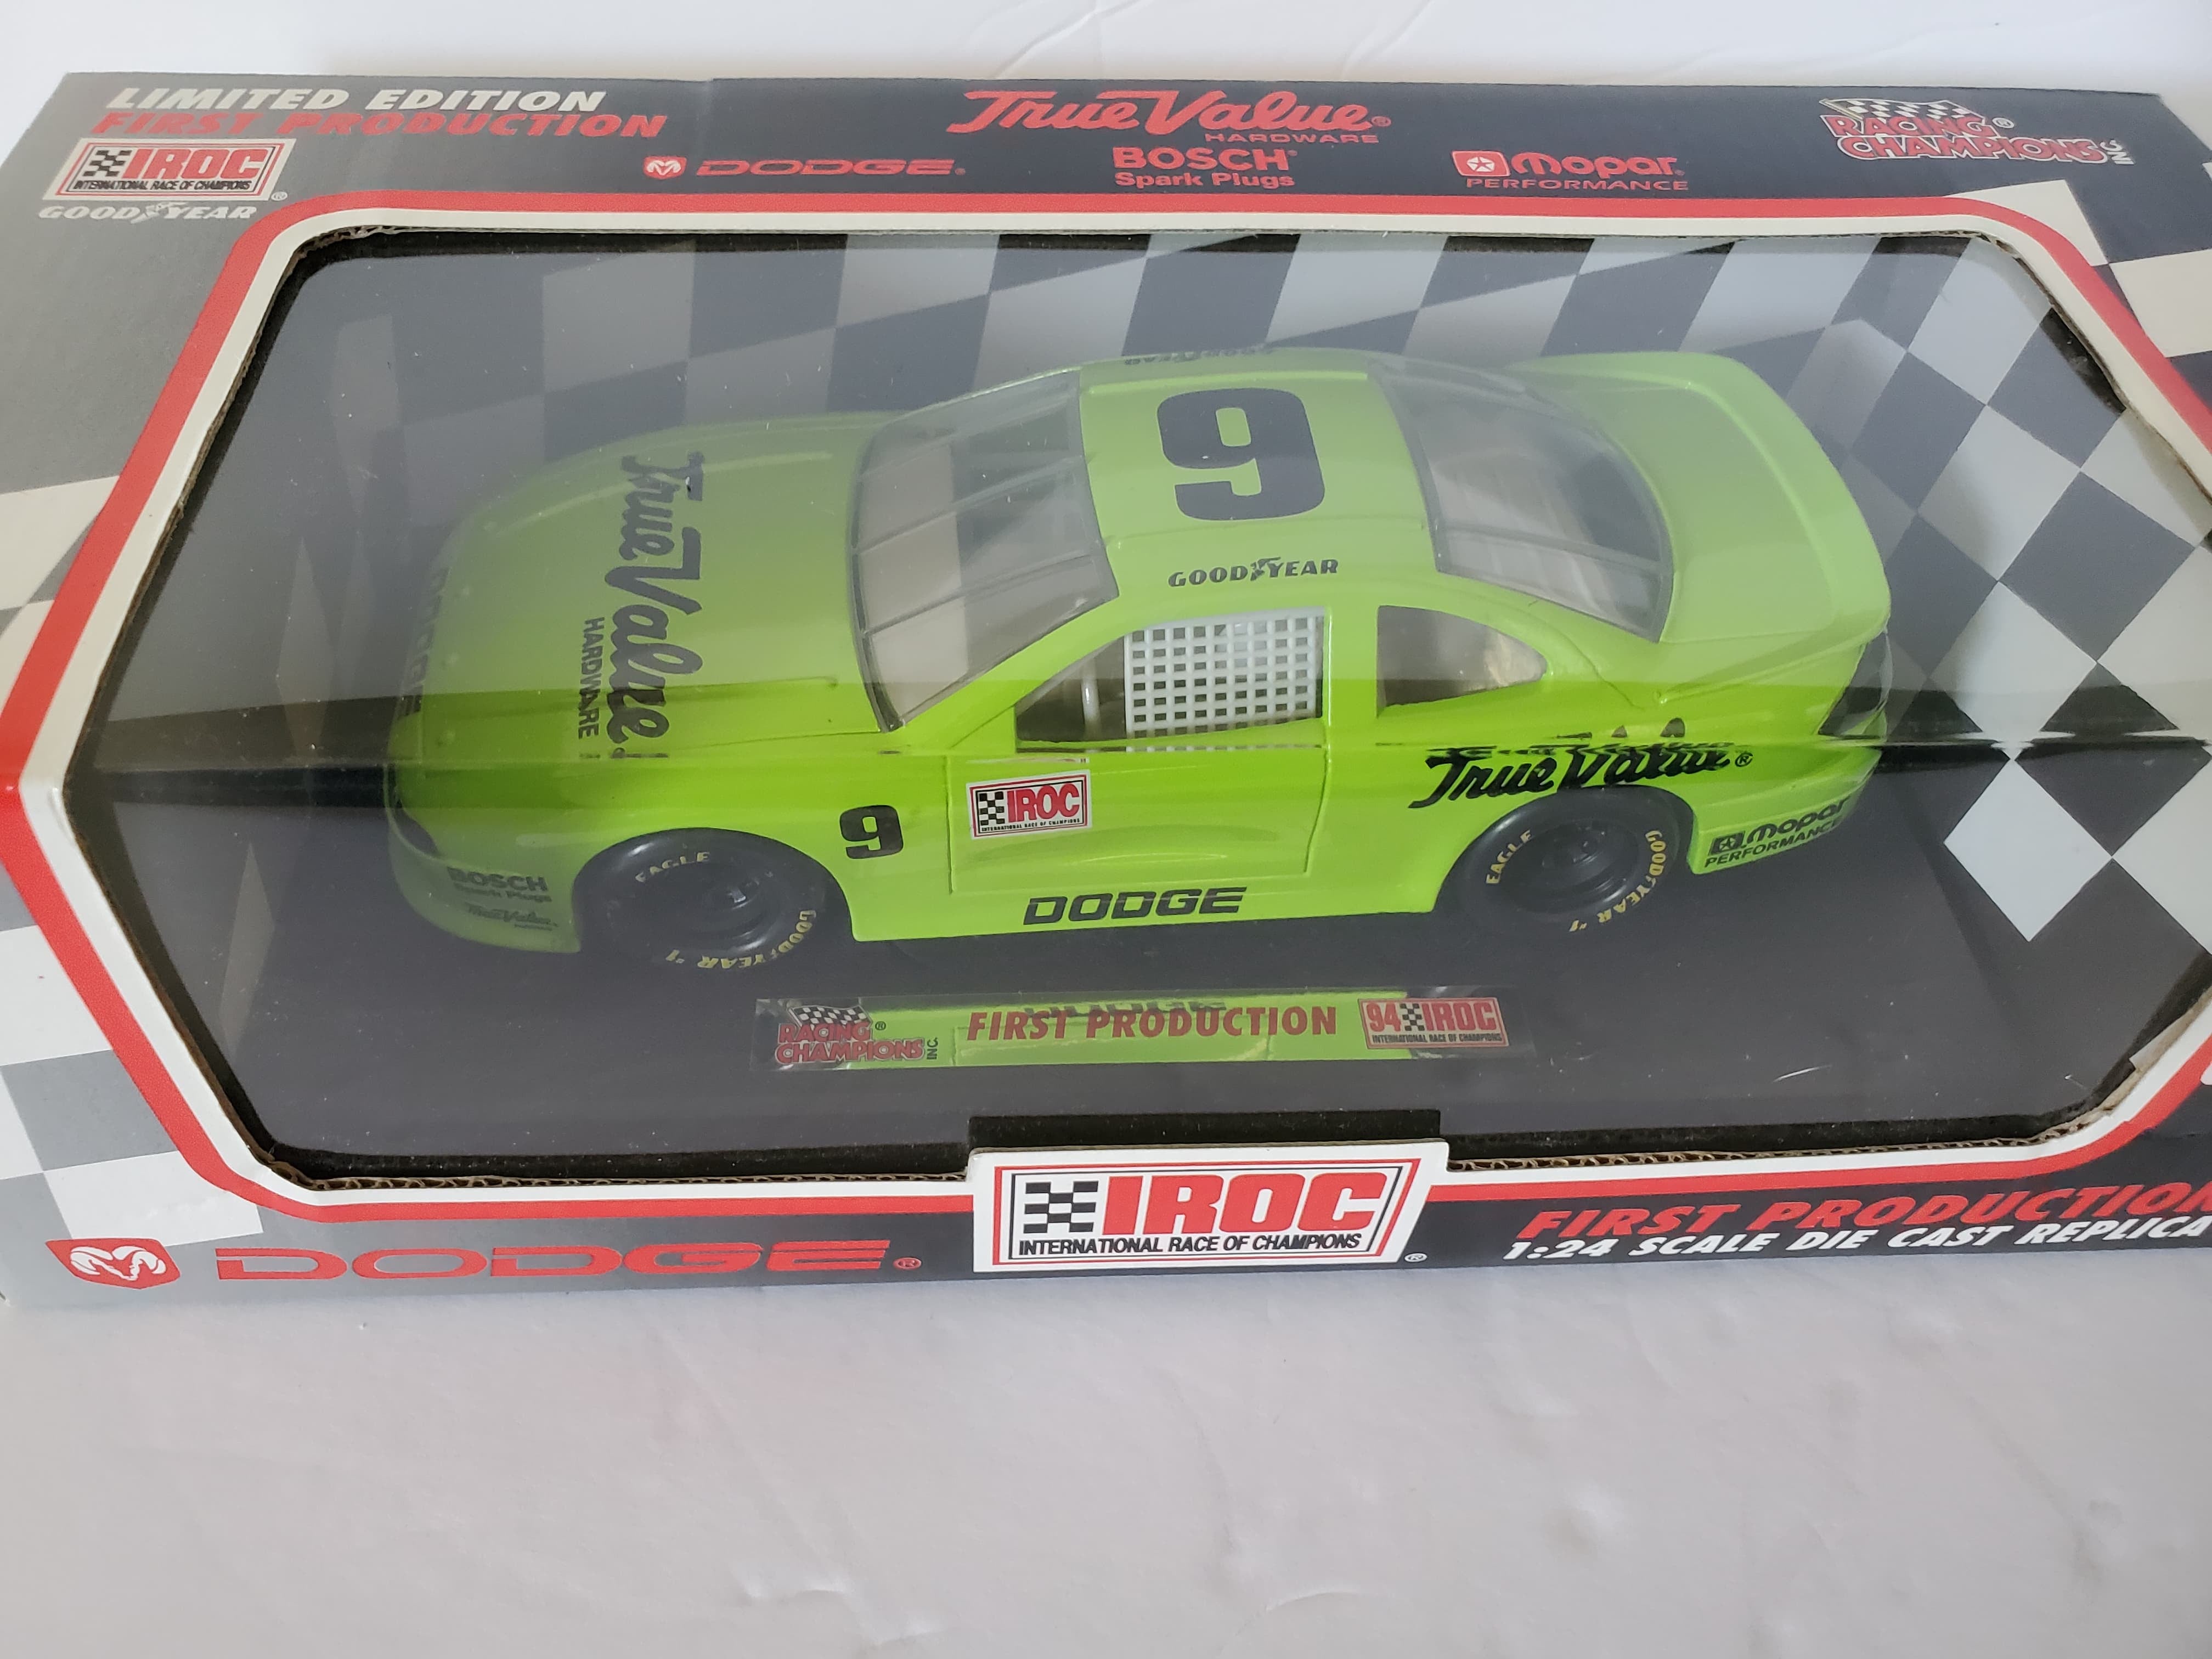 1994 RACING CHAMPIONS #9 1st PRODUCTION OF DODGE DAYTONA - 1/24 SCALE-  Second hand - SH031